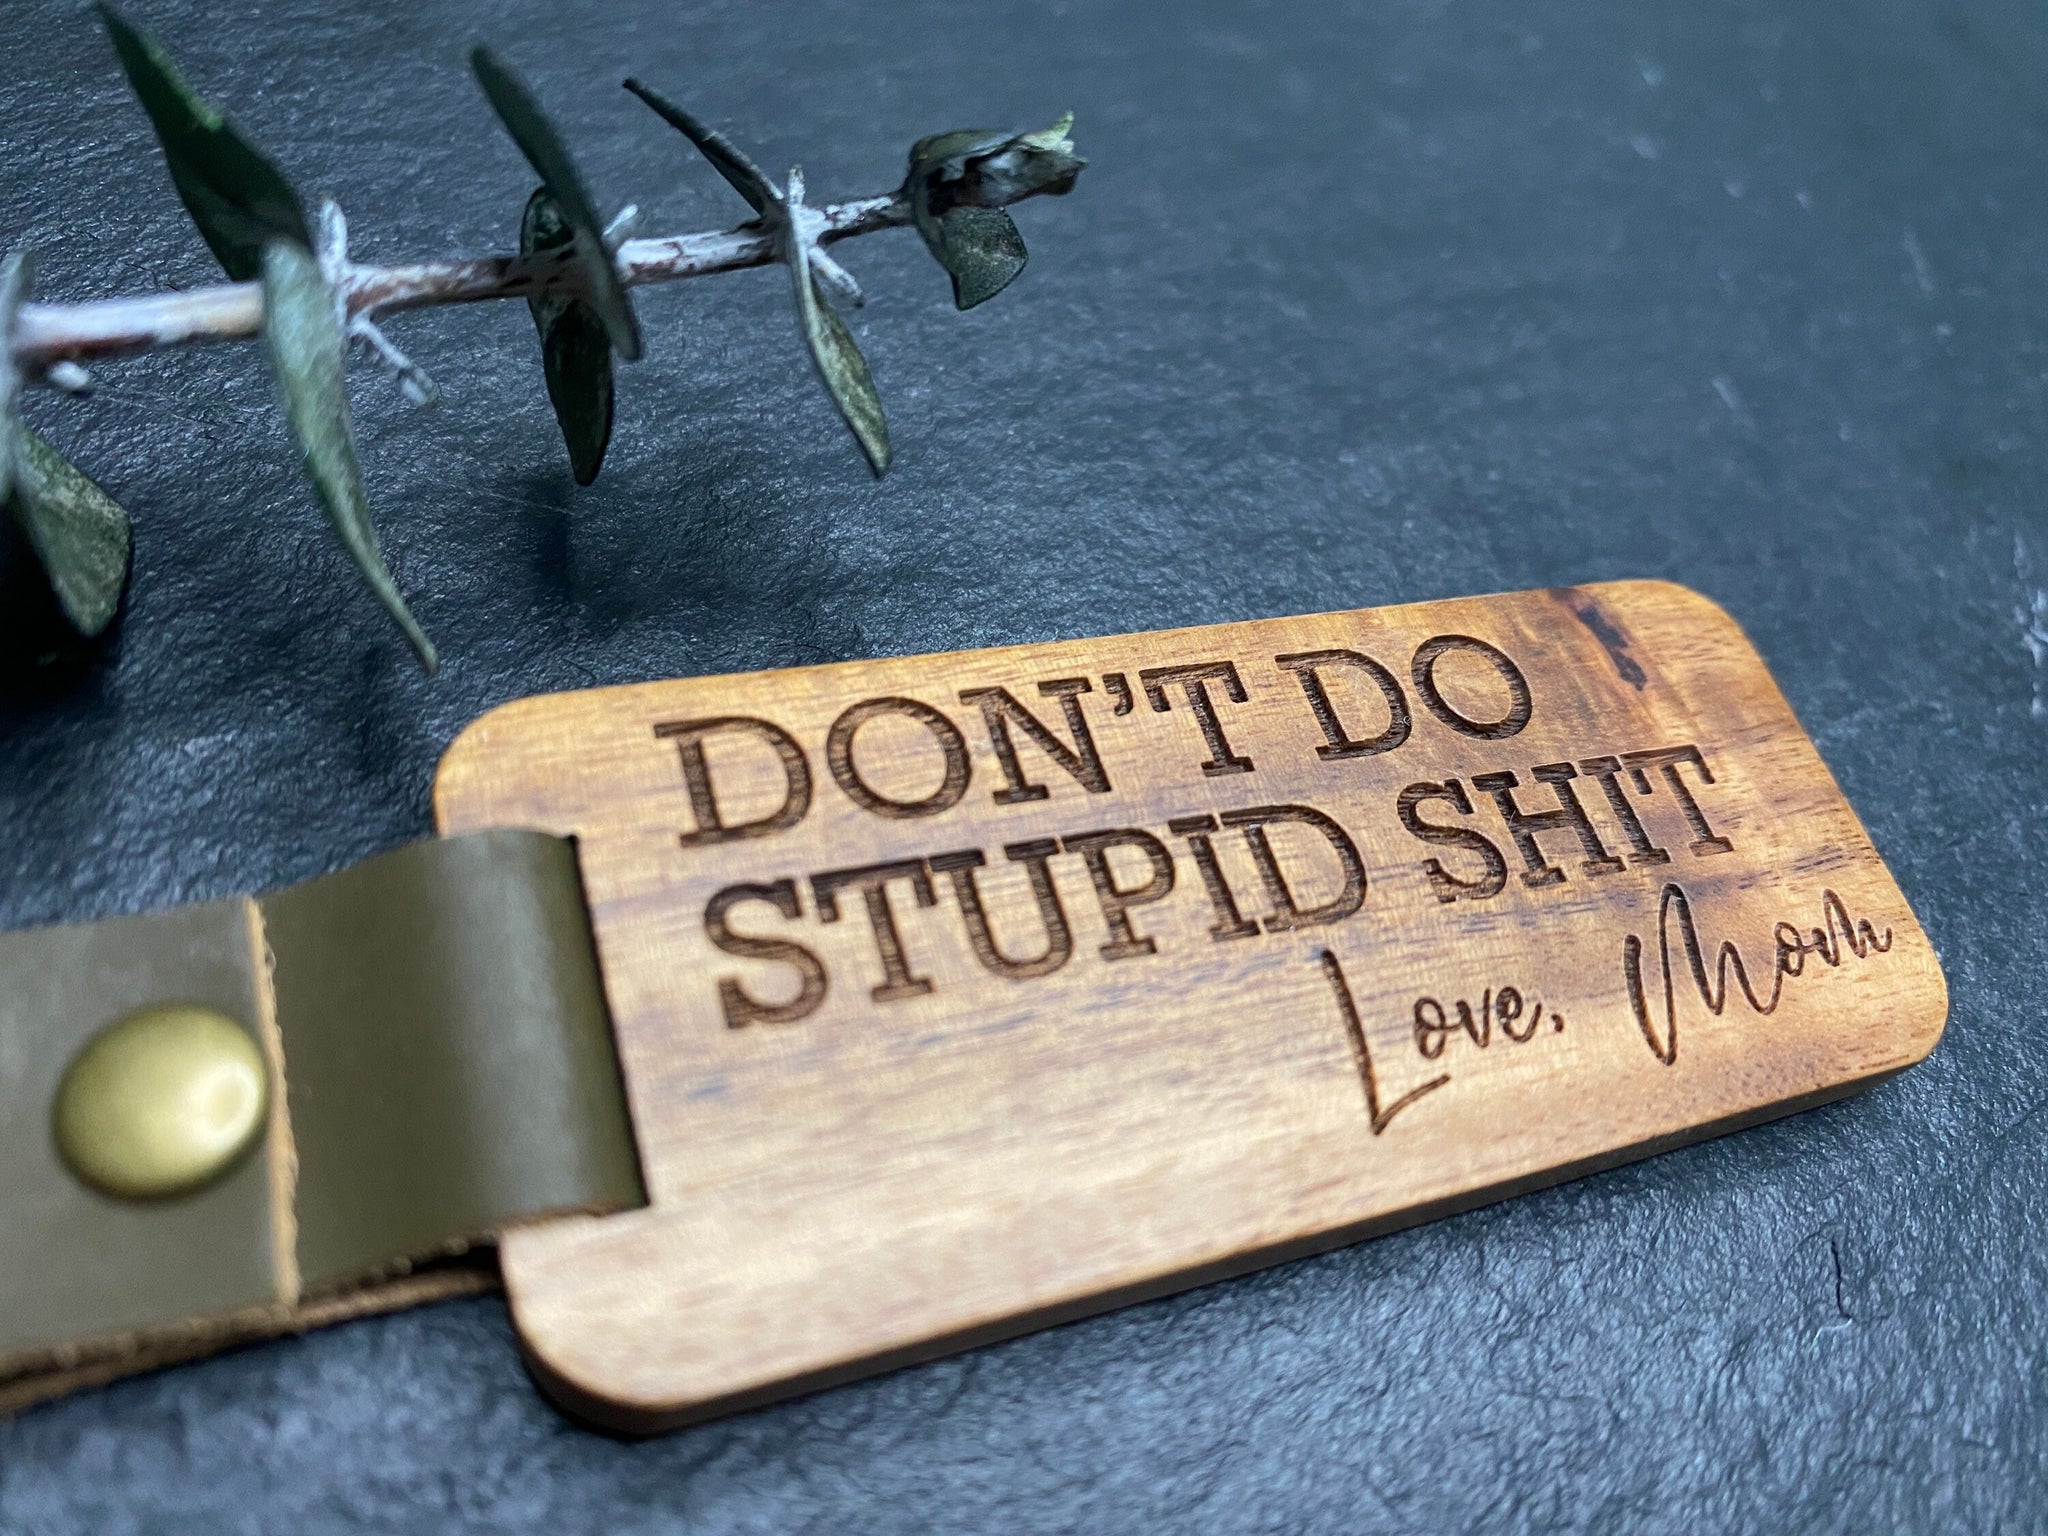 Don't Do Stupid Shit Keychain, 16th Birthday Gift, Love Mom & Dad,Love Dad,  Love Mom, Gift for Son, Gift for Daughter, Christmas, Birthday, New Driver